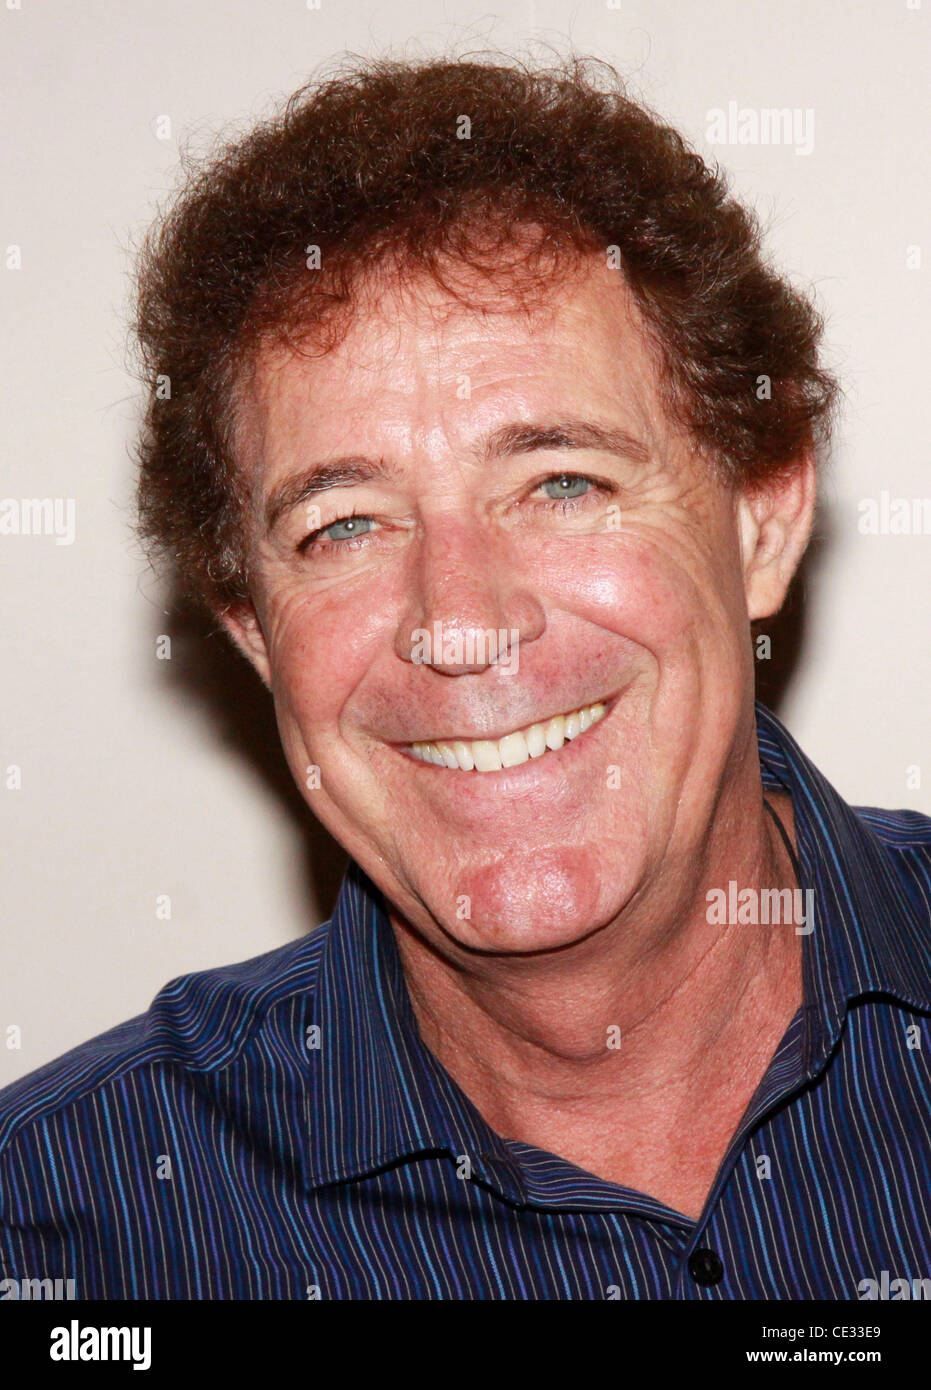 Barry Williams from The Brady Bunch 2010 Wizard World Big Apple Comic Con held at the Penn Plaza Pavilion. New York City, USA - 02.10.10 Stock Photo